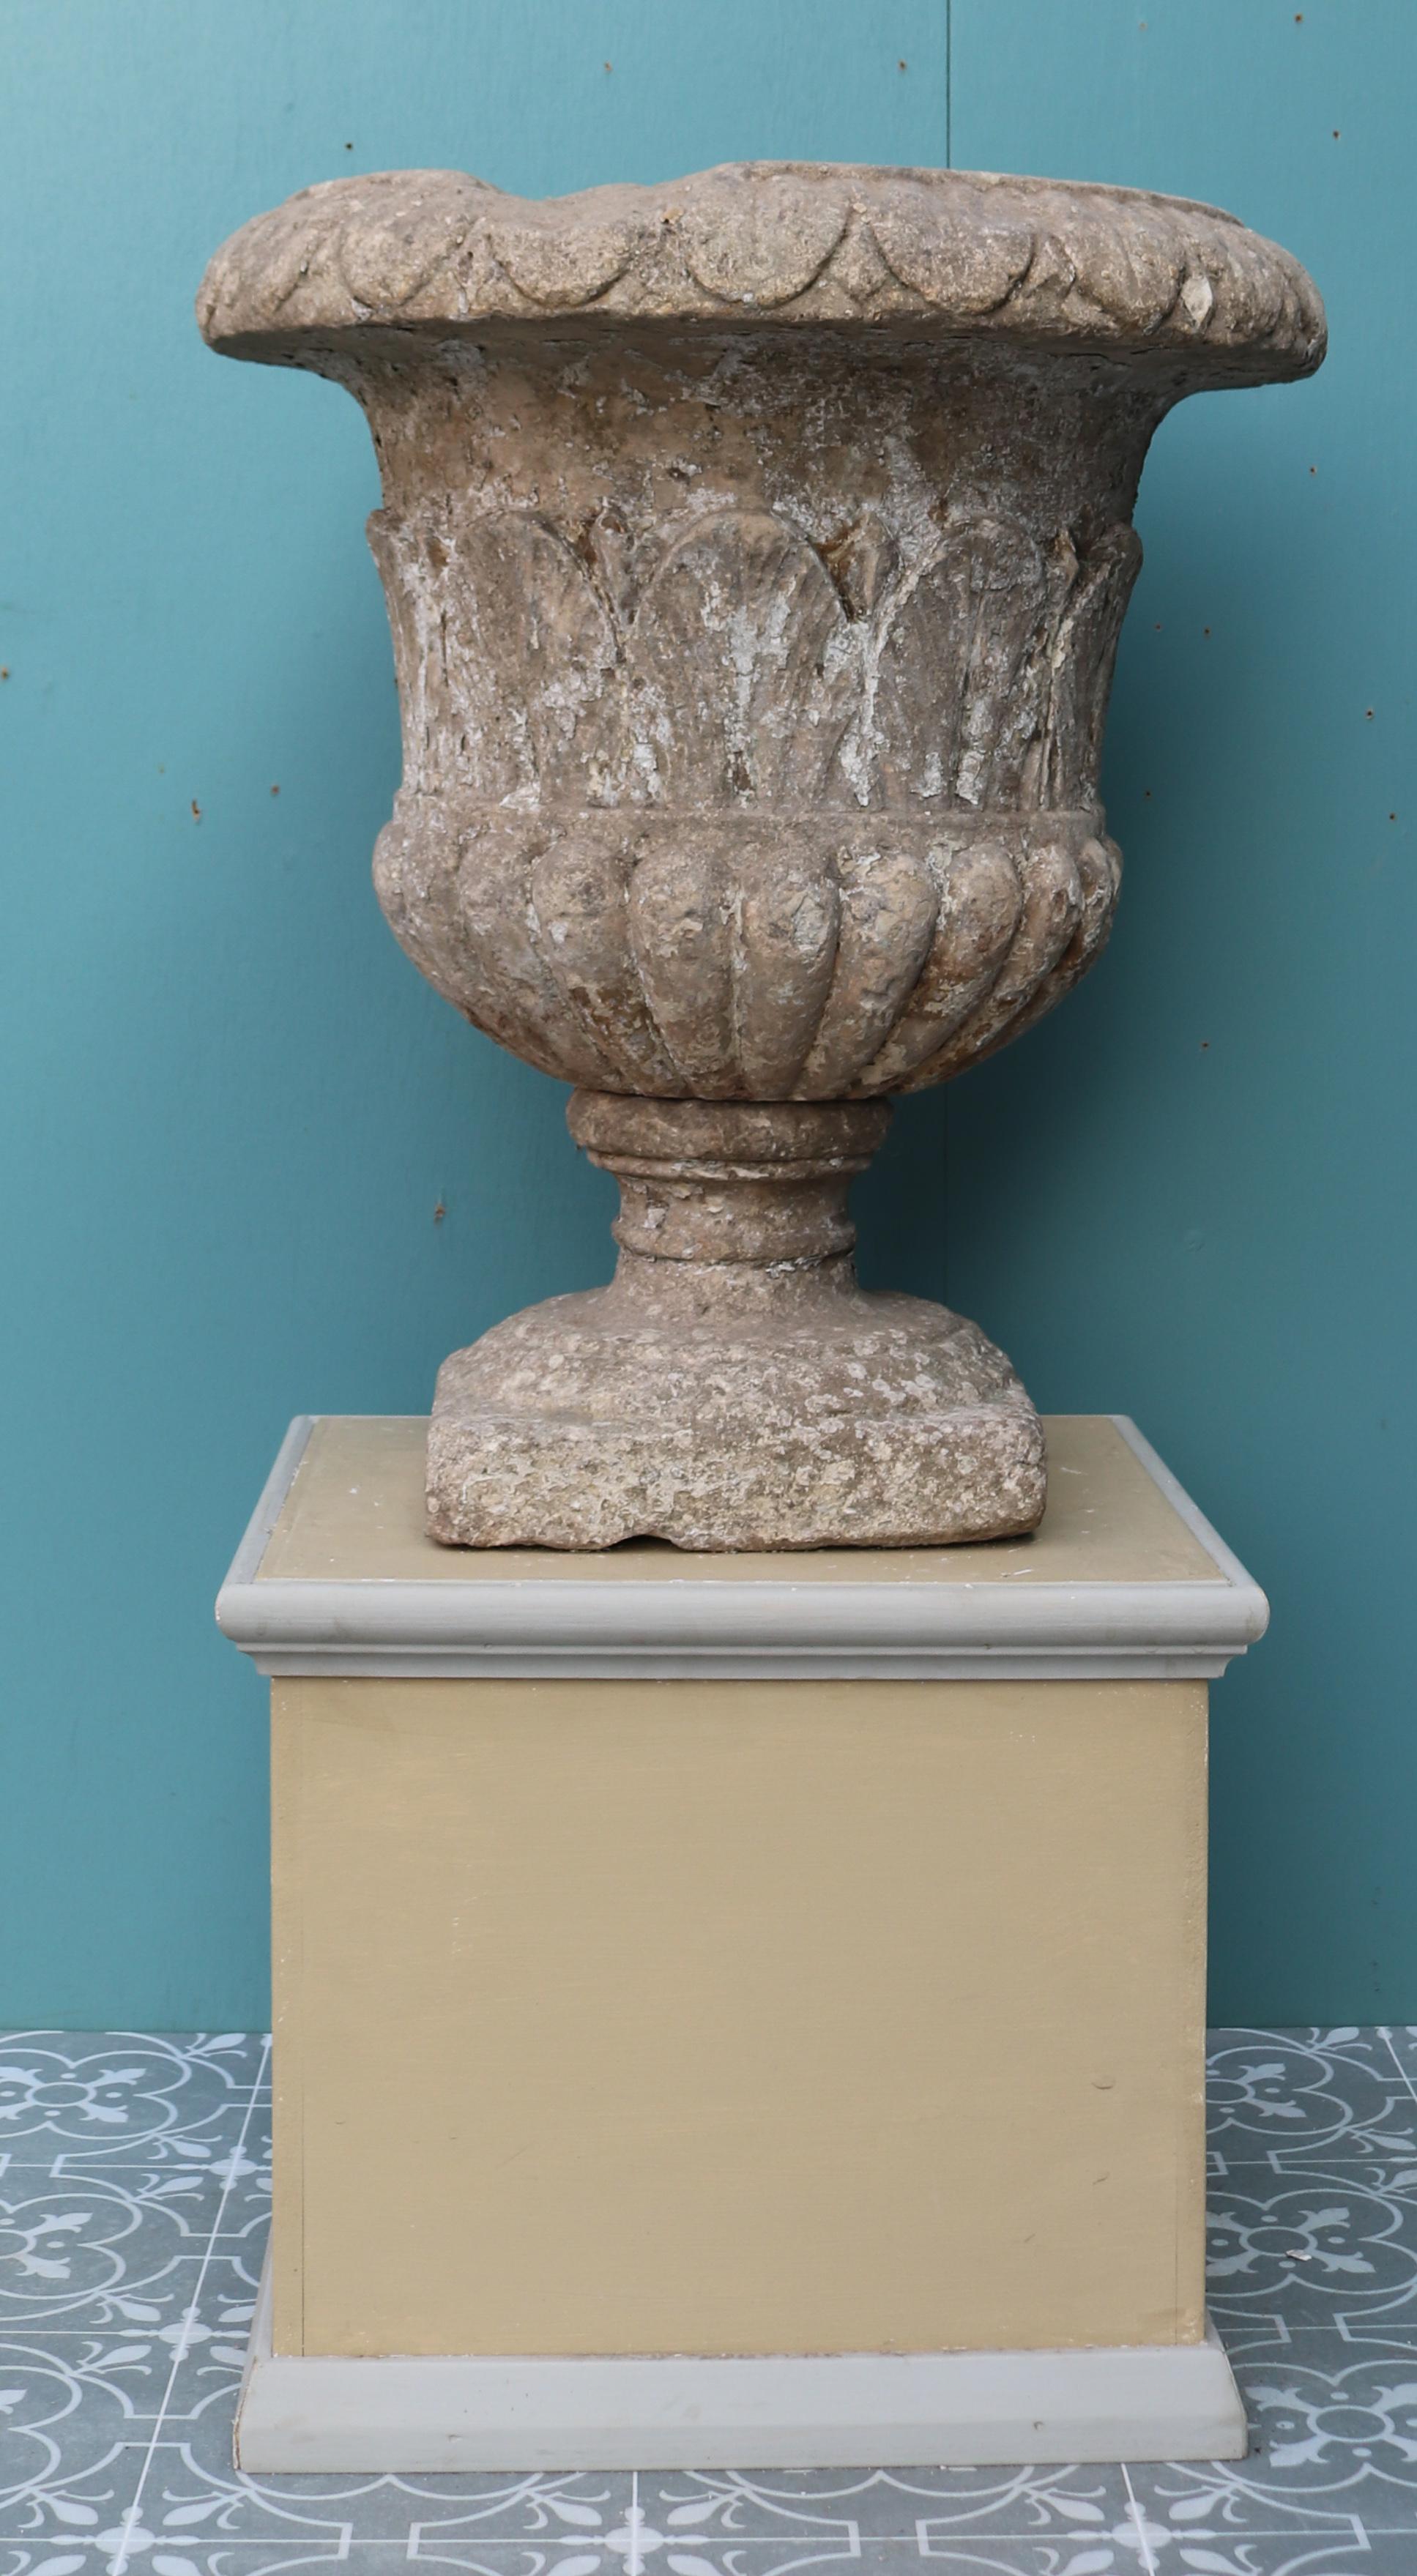 A single reclaimed limestone garden urn with gadrooning and carved decoration.

Additional dimensions:

Base 26 x 26 cm.